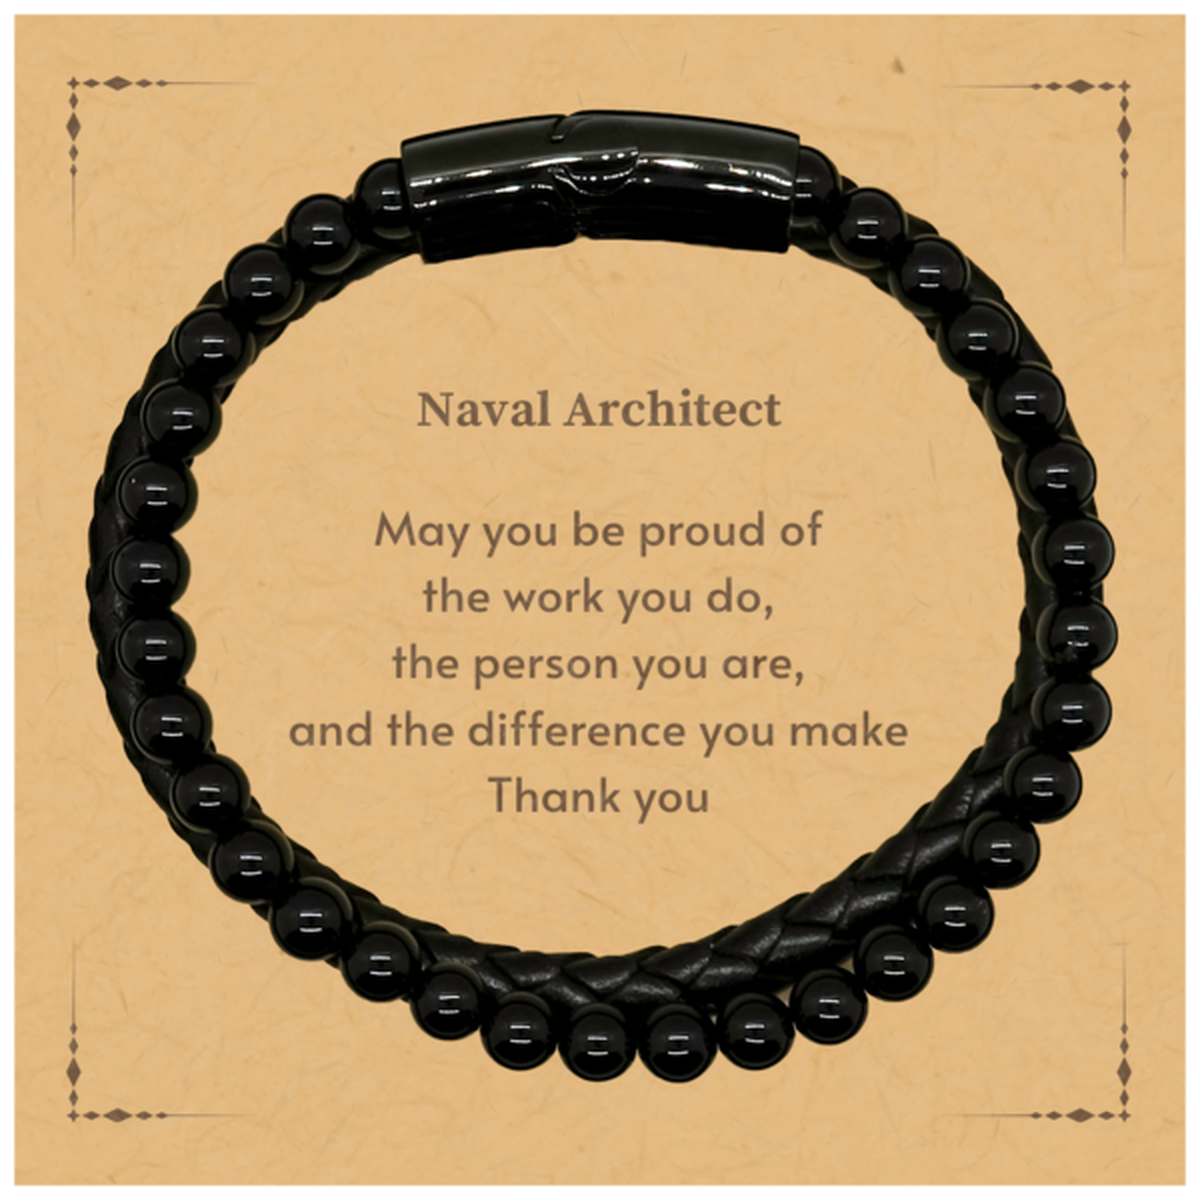 Heartwarming Stone Leather Bracelets Retirement Coworkers Gifts for Naval Architect, Naval Architect May You be proud of the work you do, the person you are Gifts for Boss Men Women Friends